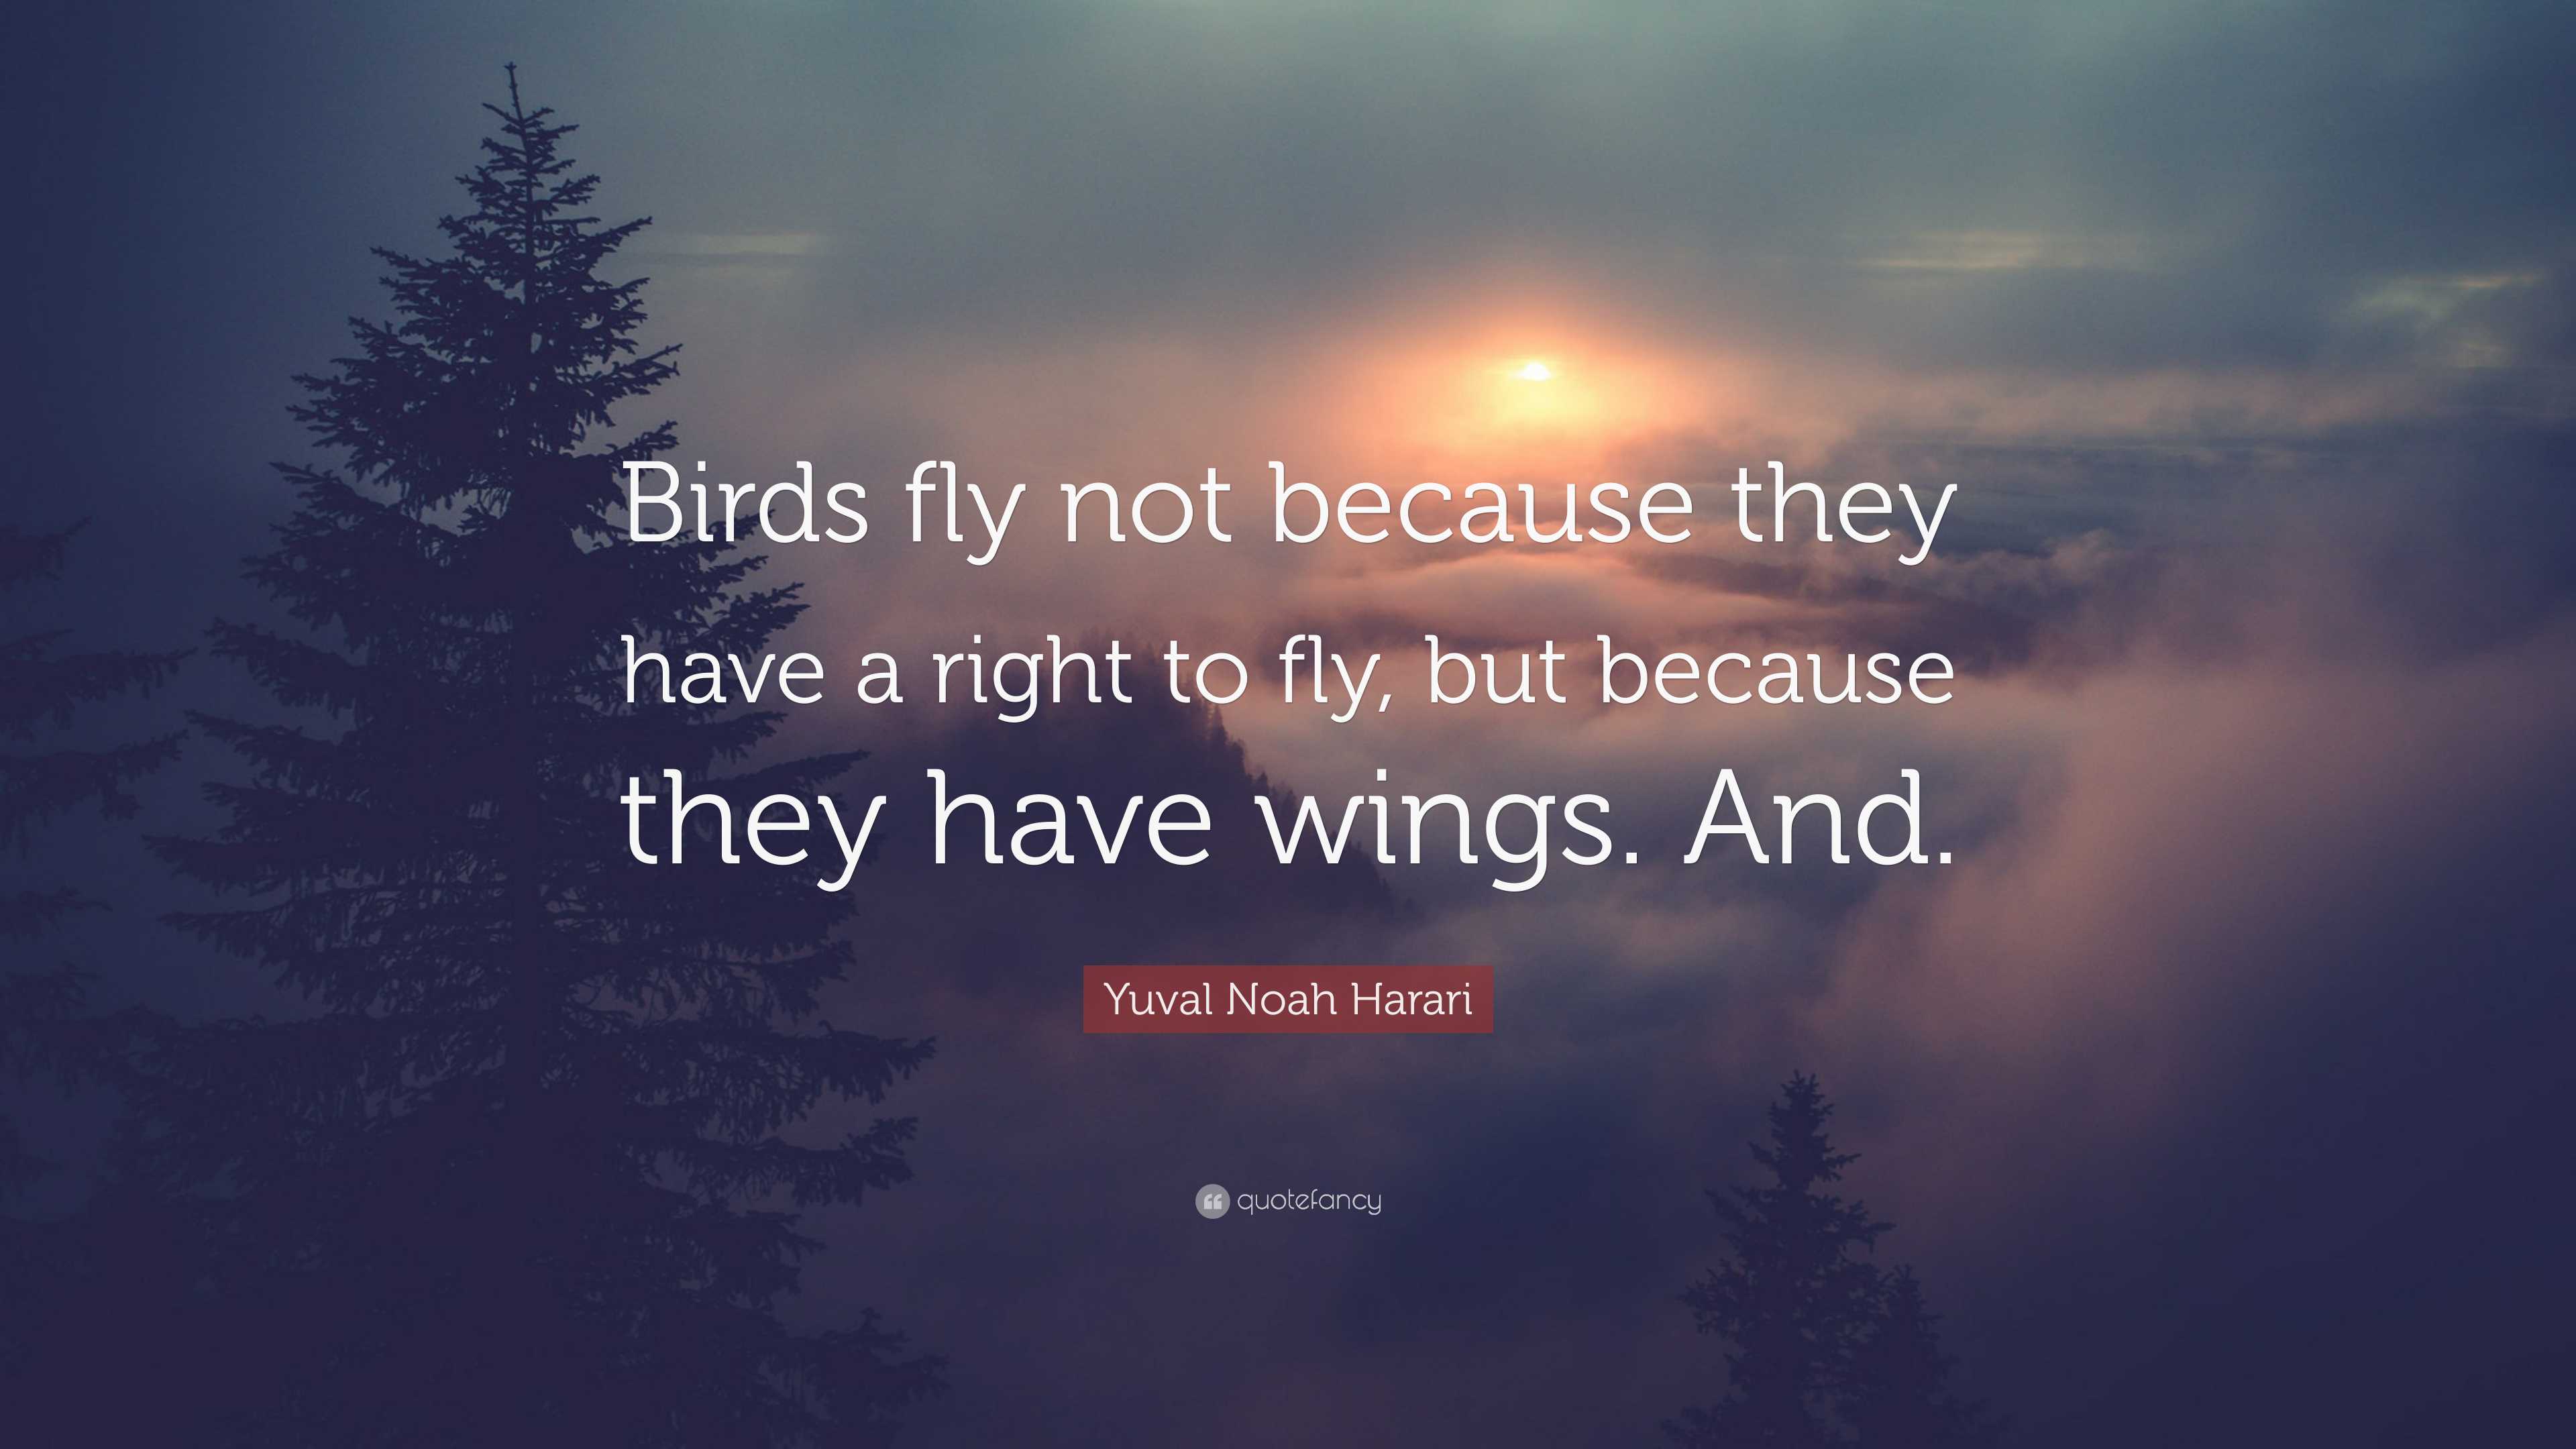 Yuval Noah Harari Quote: “Birds fly not because they have a right to ...